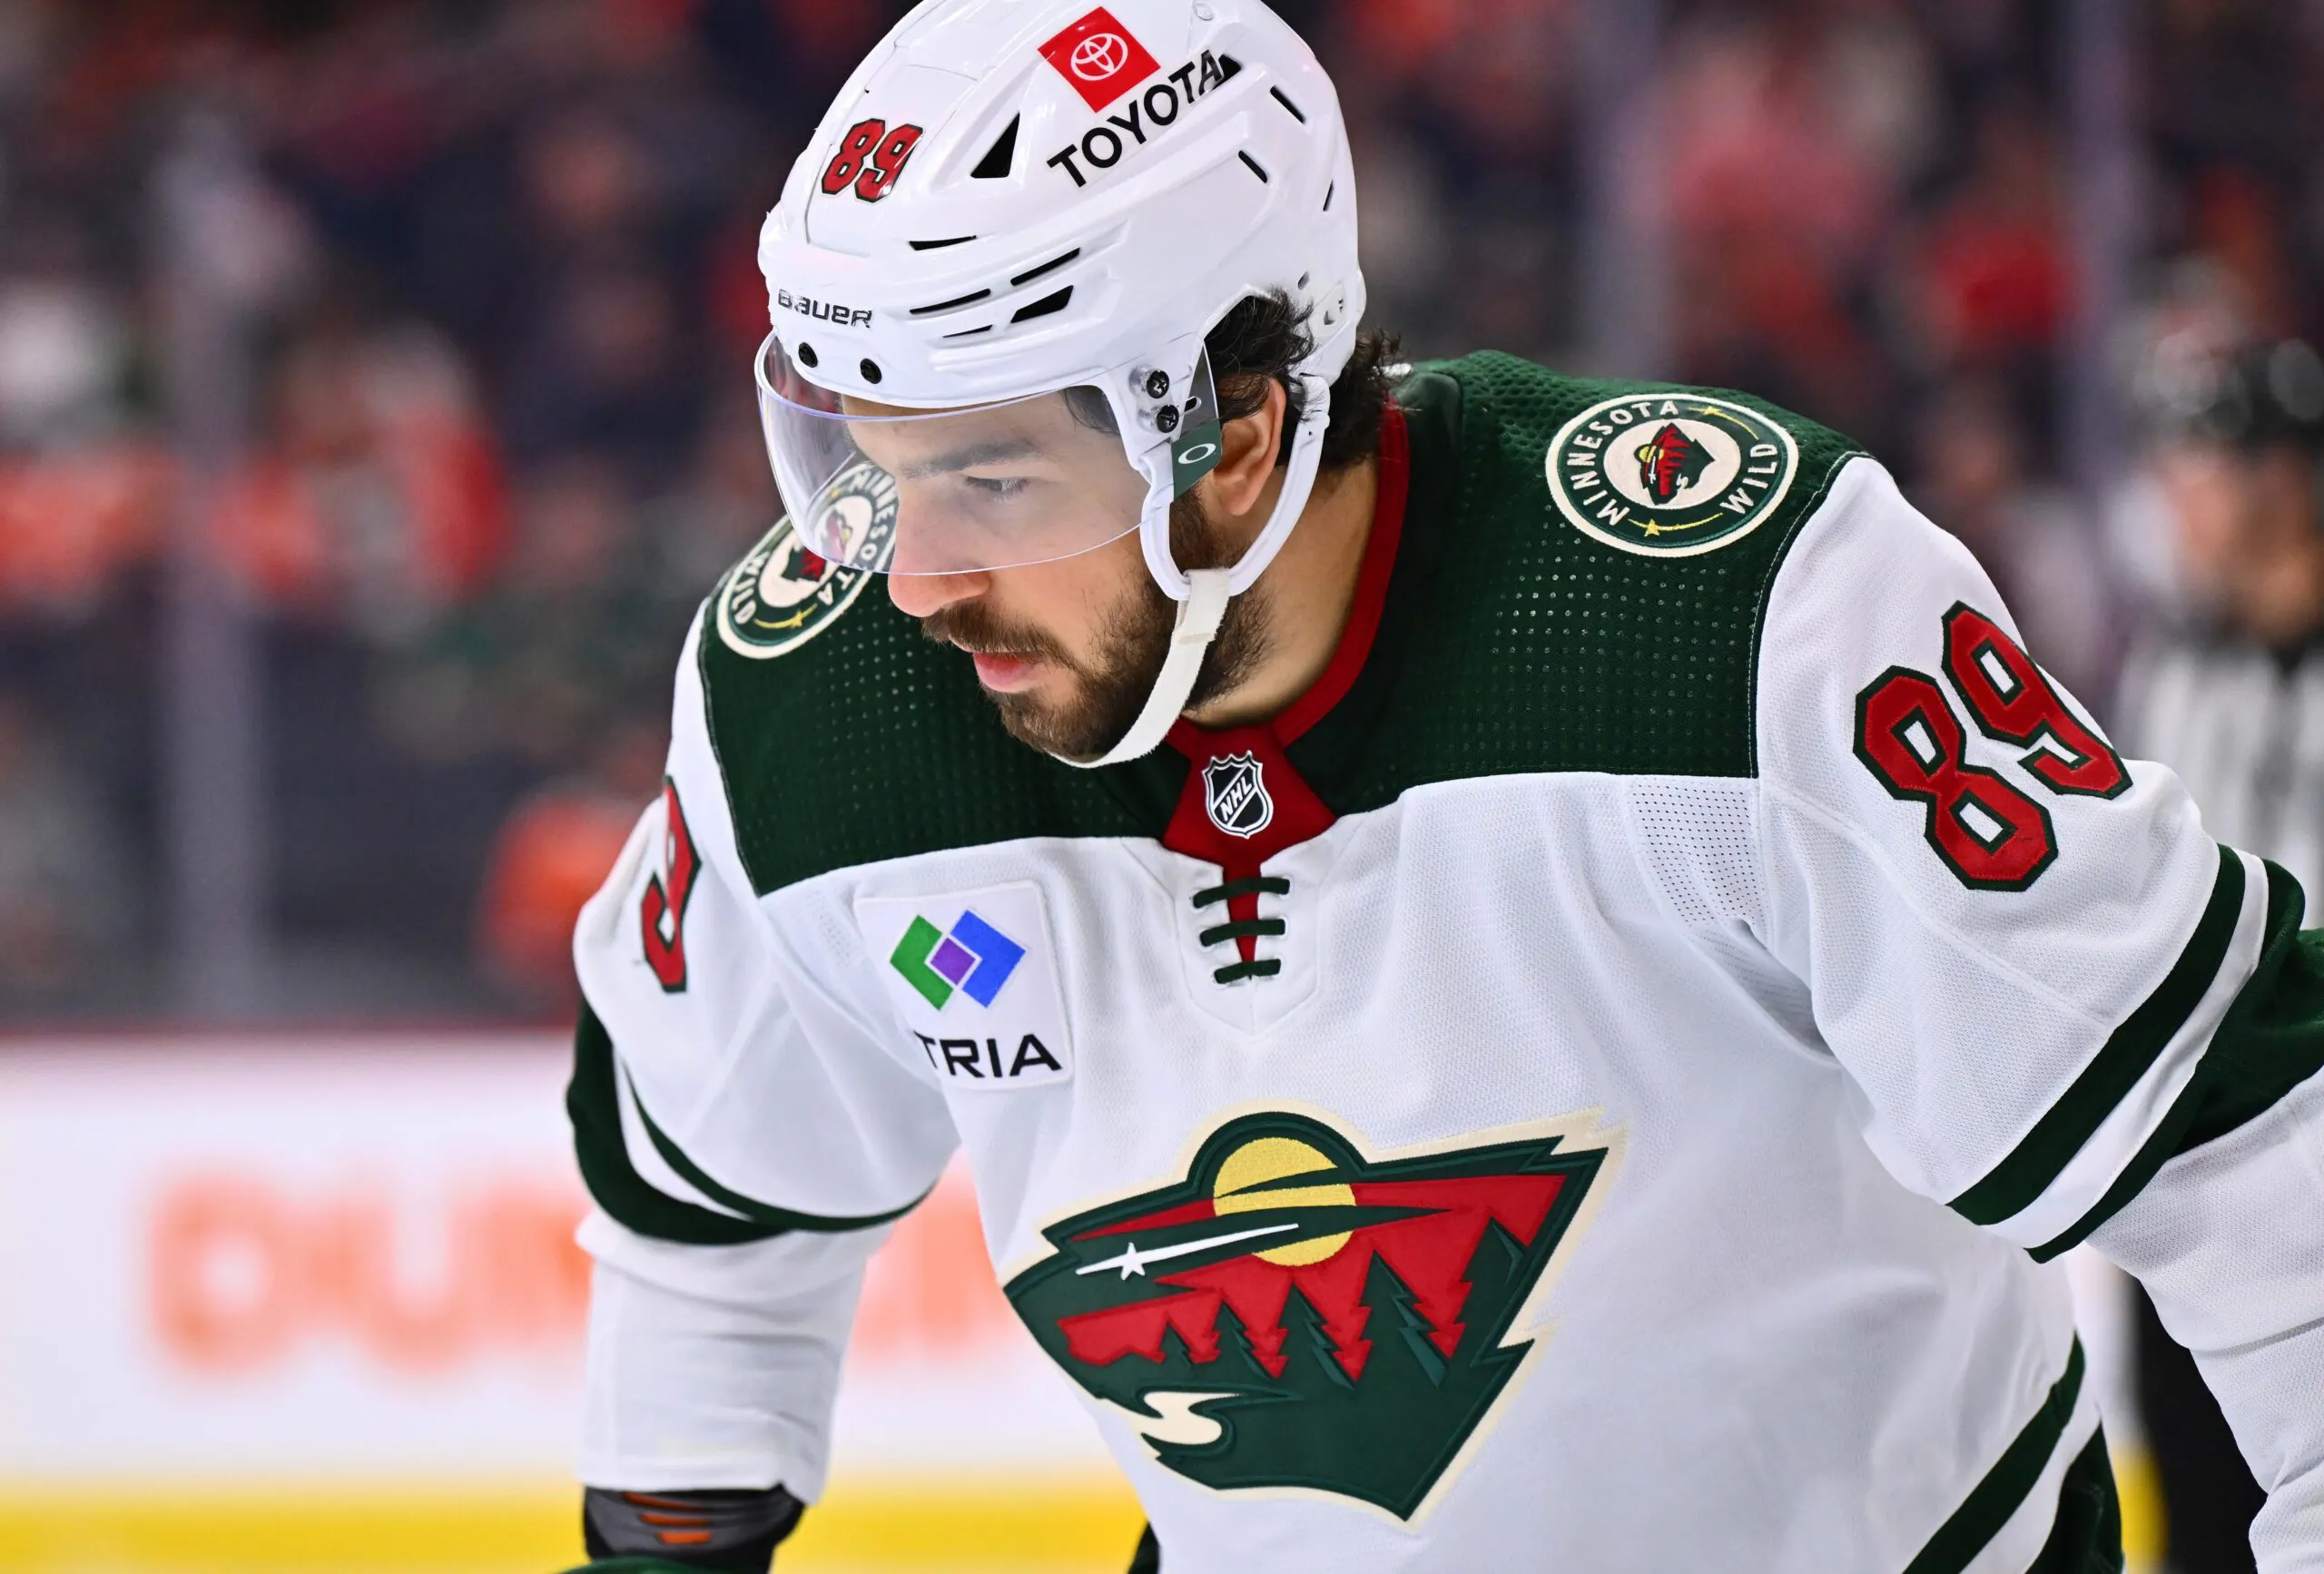 Minnesota Wild’s Frederick Gaudreau to miss Thursday’s game with upper-body injury